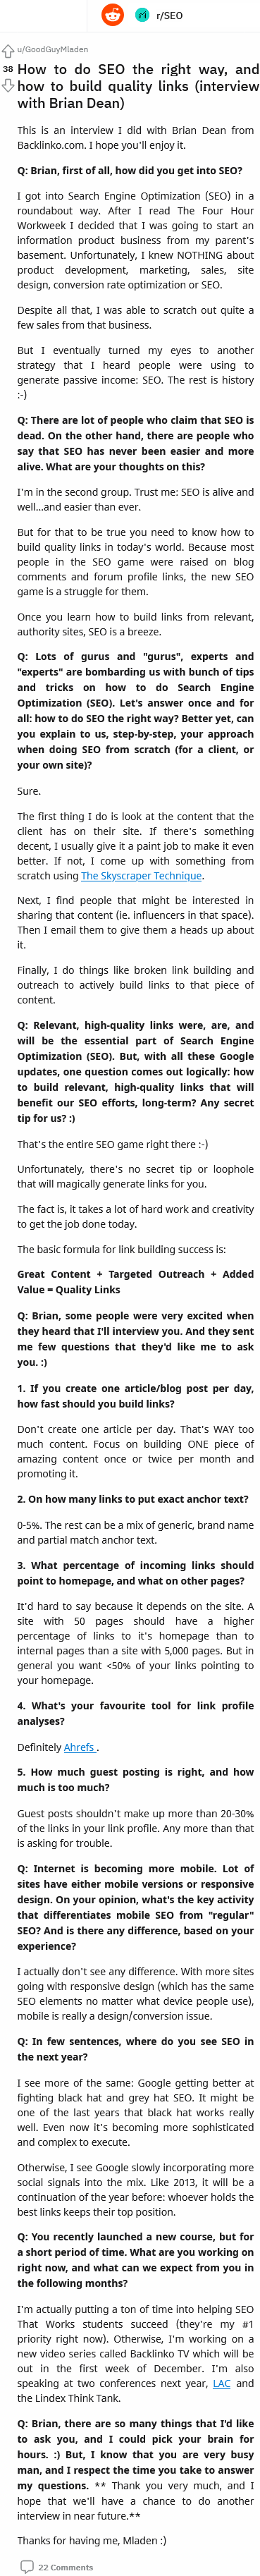 an interview i did with brian dean from backlinko com about content quality anchor text of incoming links and creation frequency for both